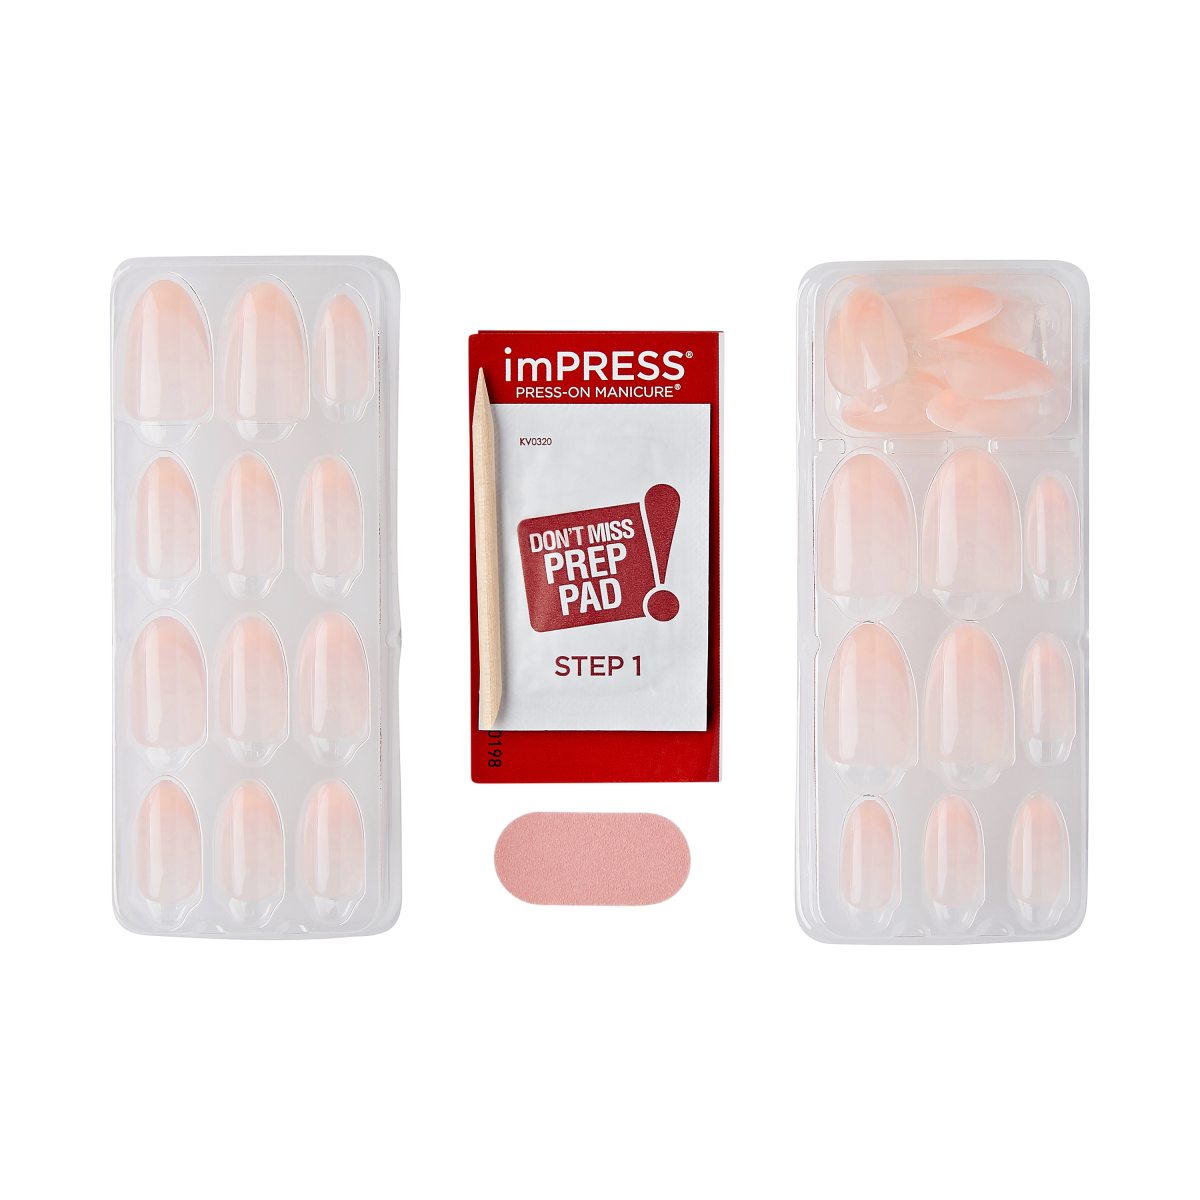 imPRESS Bare French Press-On Nails - Ace